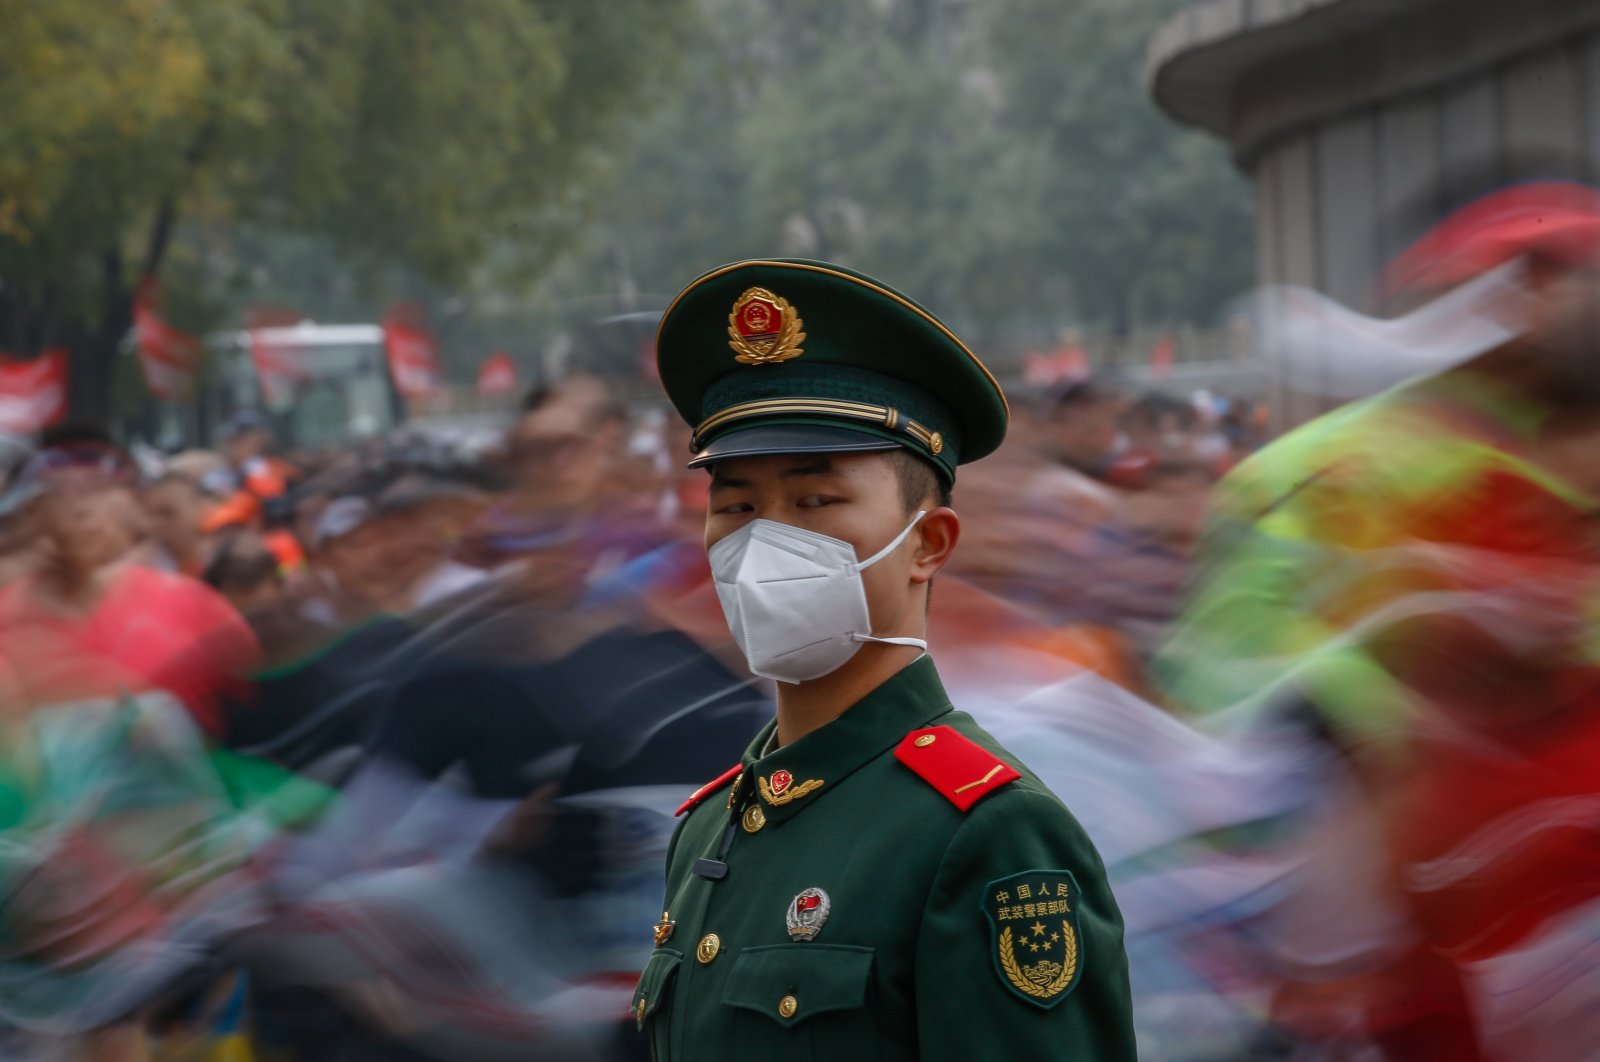 A soldier stands guard as runners compete during the Beijing Marathon in Beijing, China, Nov. 6, 2022. (EPA Photo)